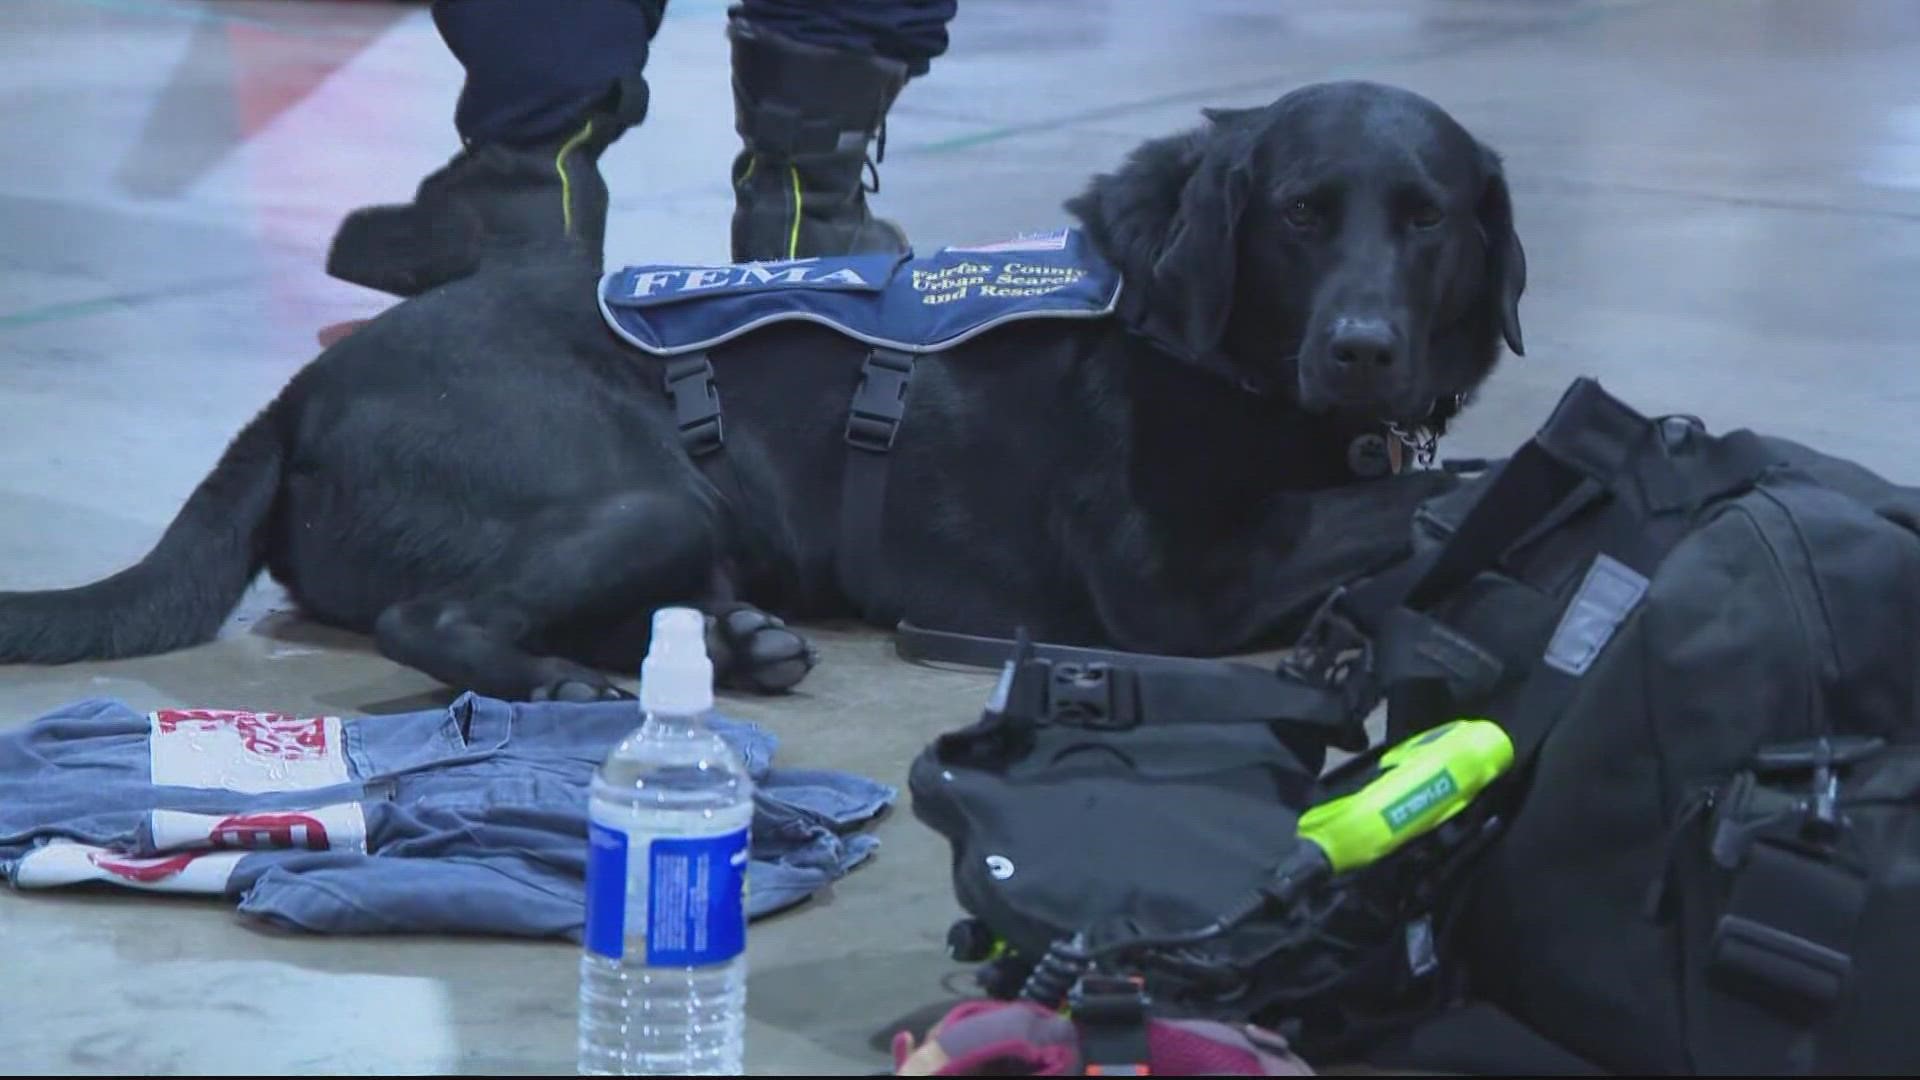 A Type-3 team was deployed, which includes 45 personnel members and a couple rescue pups.